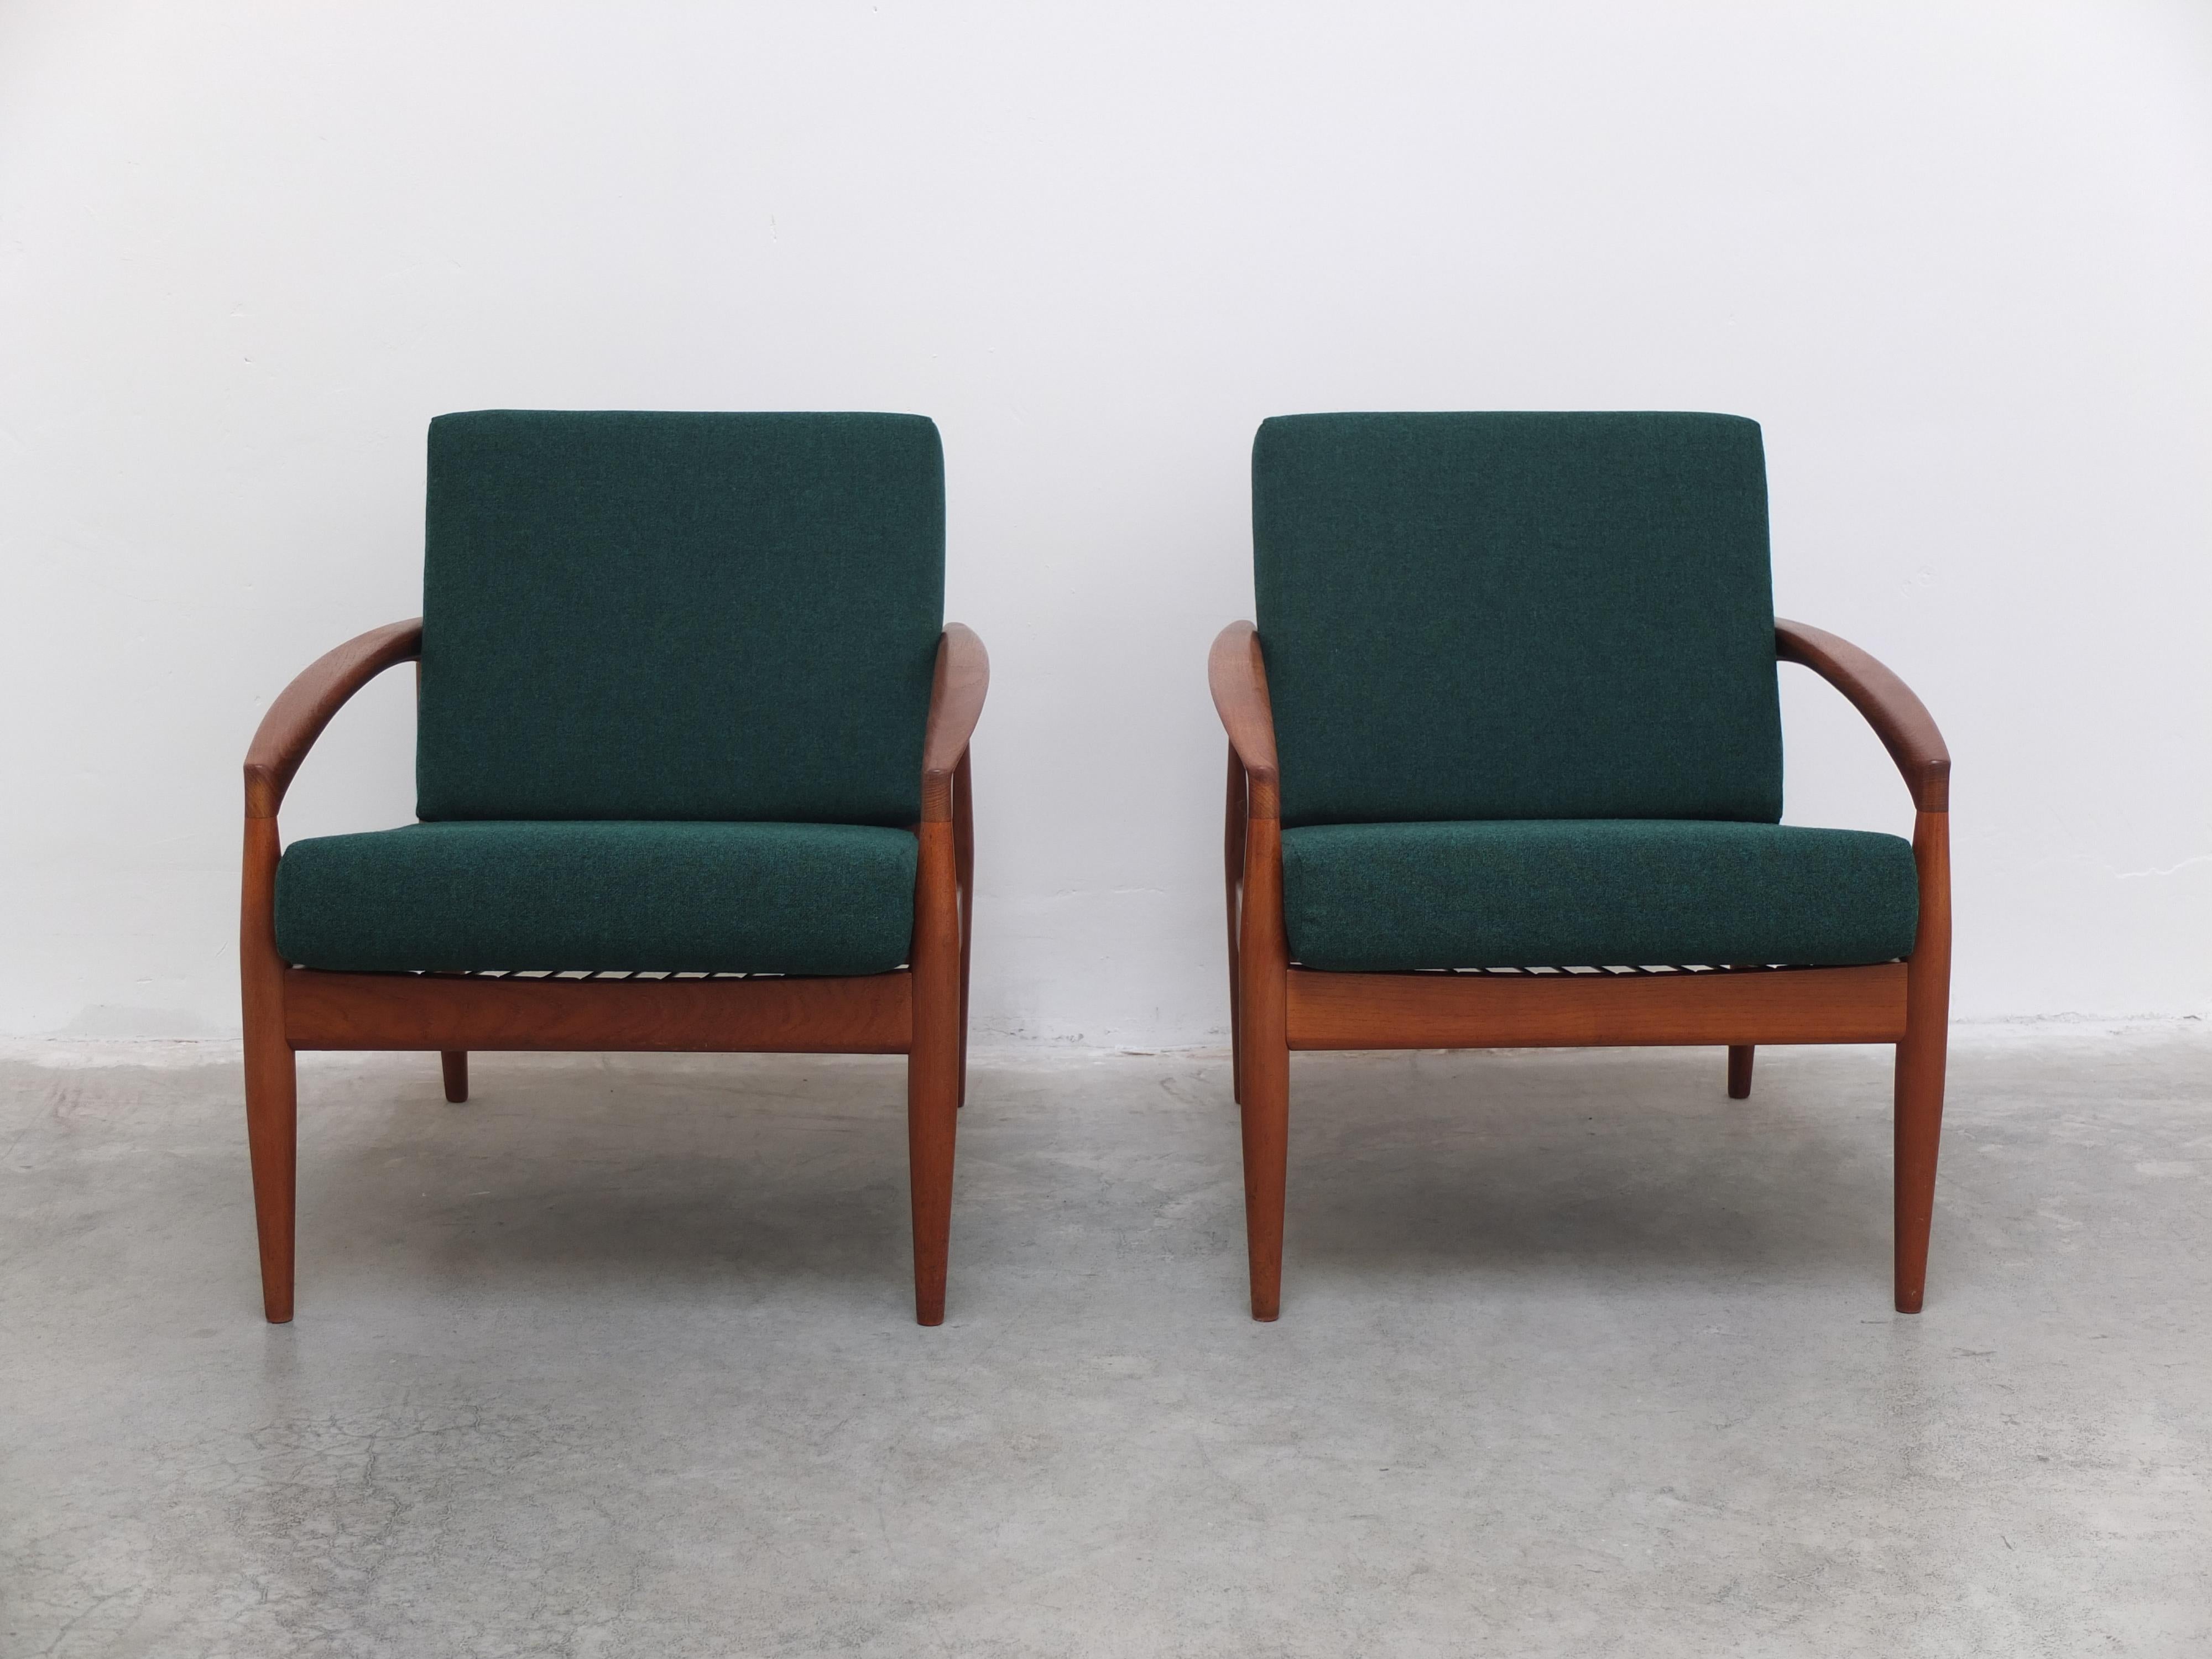 Magnificent pair of ‘Model 121’ easy chairs designed in 1956 by Kai Kristiansen and produced by Magnus Olesen in Denmark. Beautifully crafted solid teak frames with the signature armrests that give these chairs their nickname ‘Paper Knife’. The